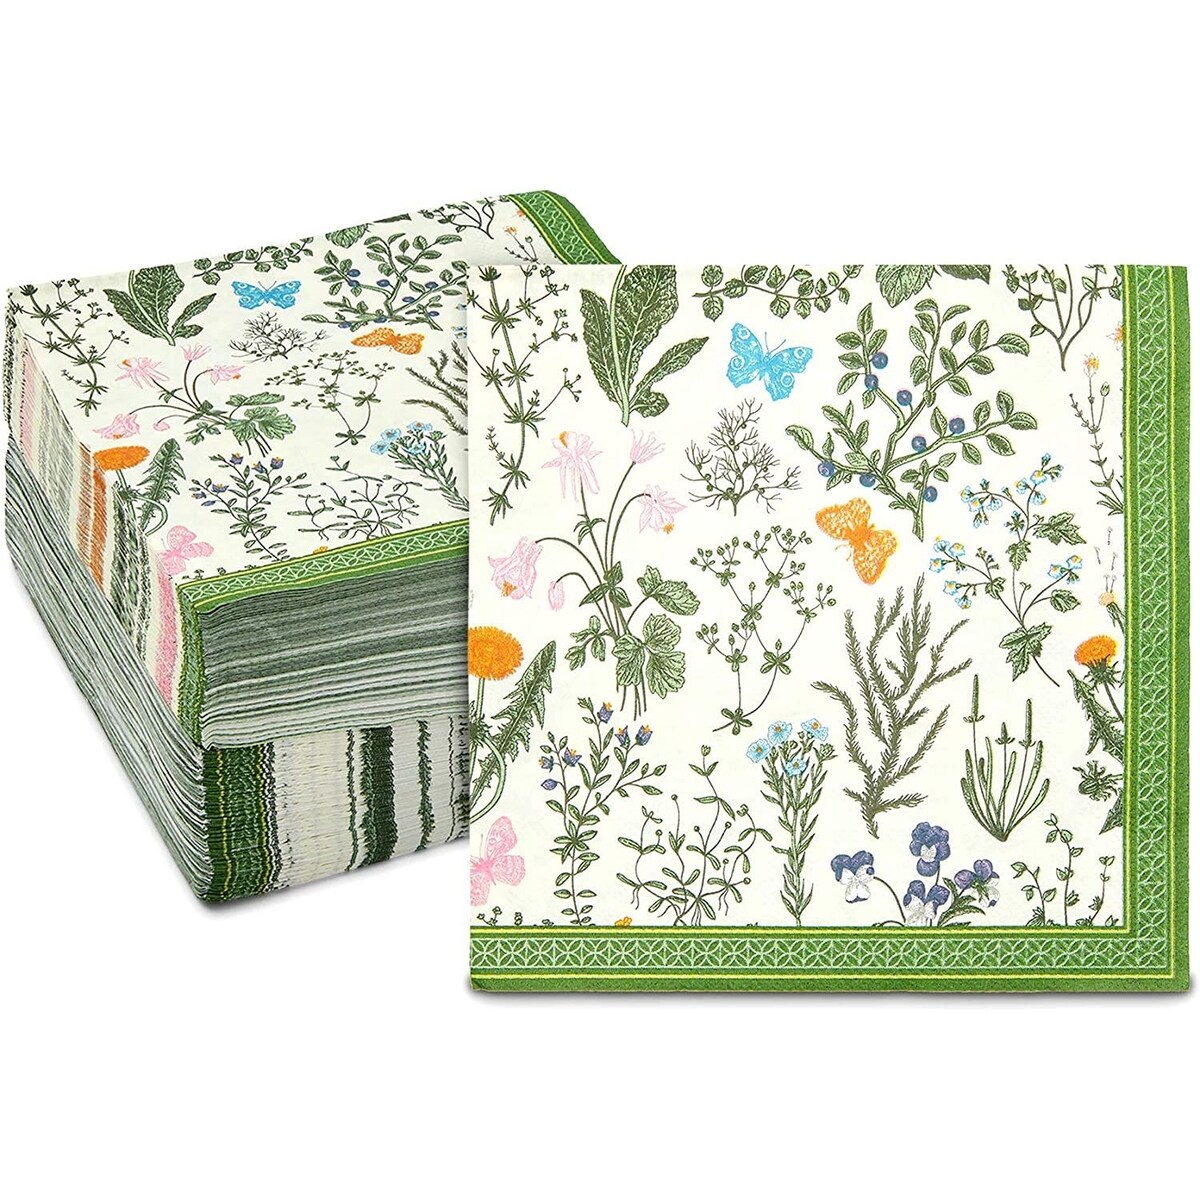 Floral Paper Napkins for Garden Party, Green Botanical Herb (6.5 In, 150 Pack)